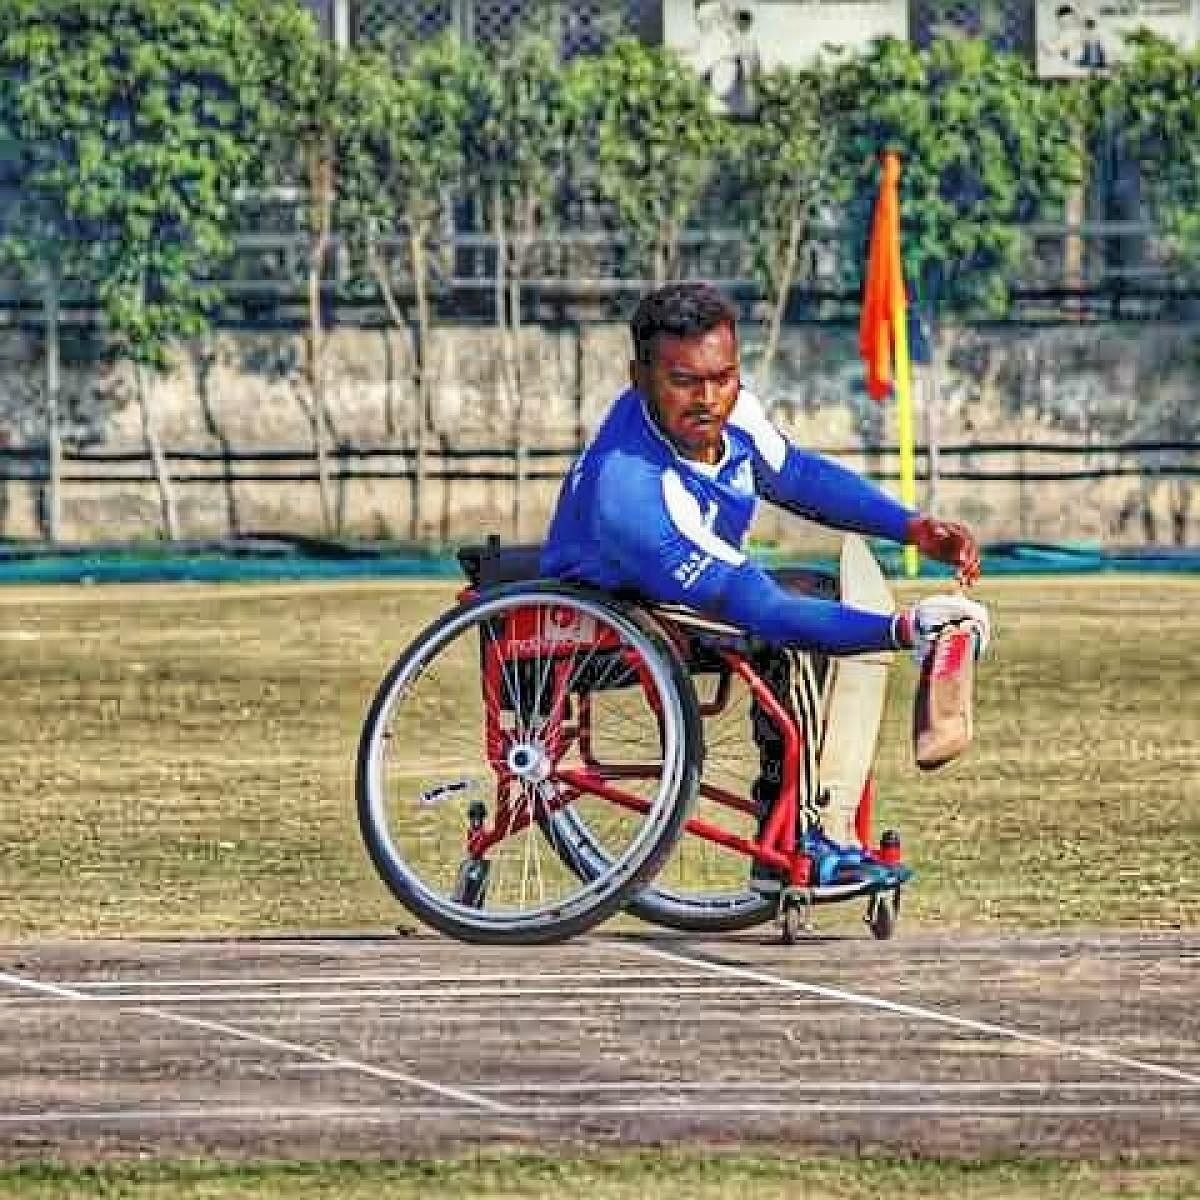 2 from city make it to I’ntl Wheelchair Cricket tourney